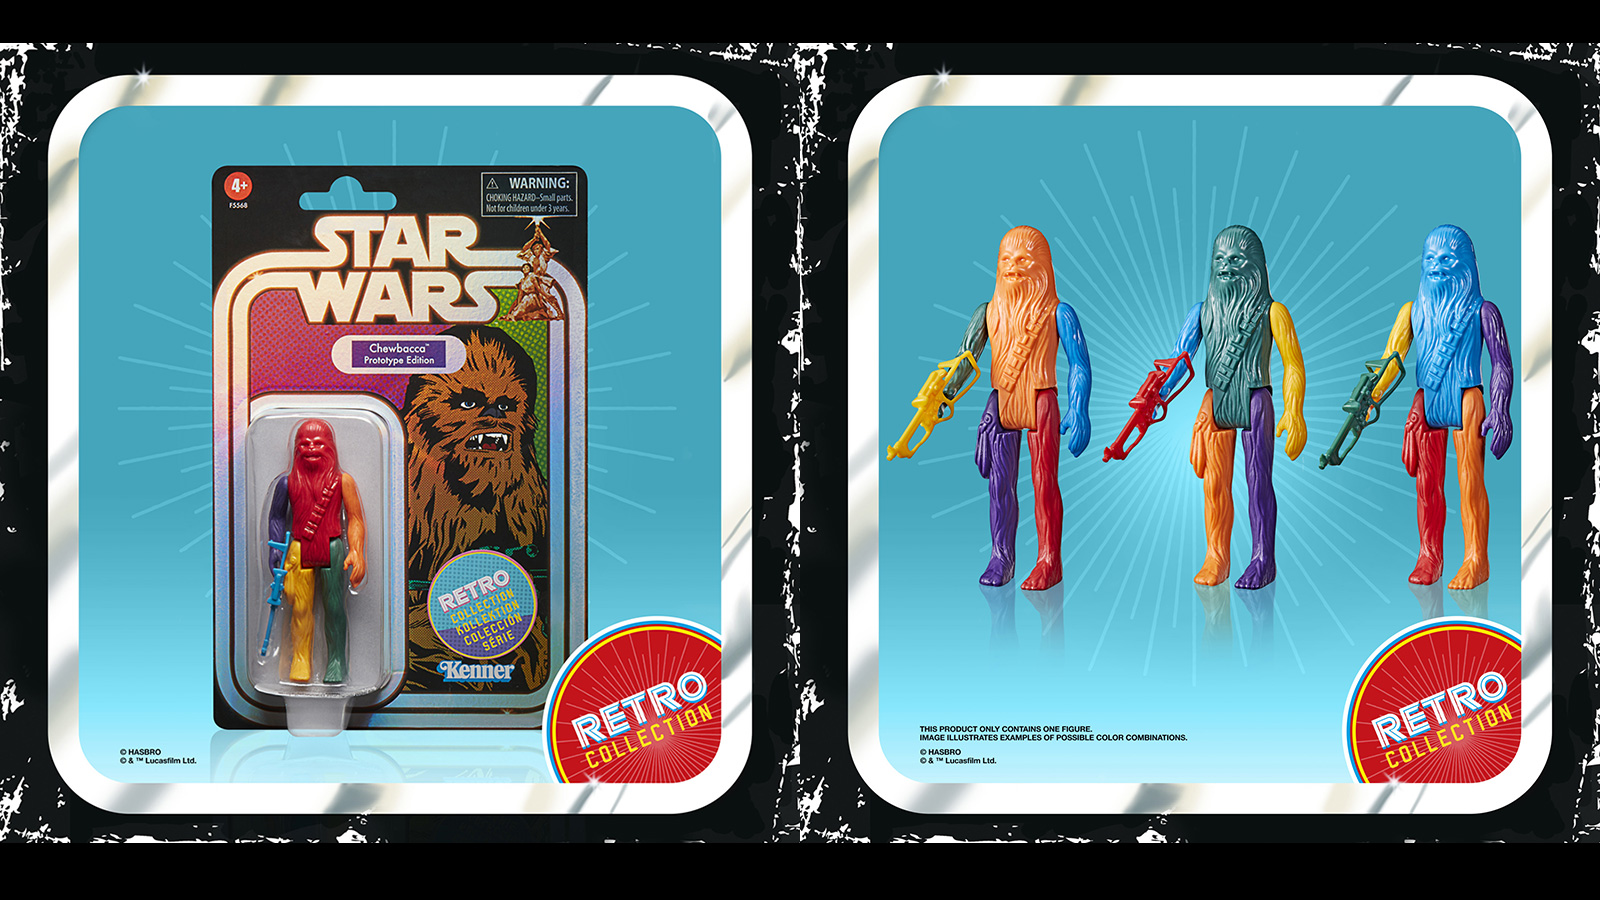 Preorder Now At Target.com- Exclusive Retro Collection Chewbacca Prototype Figure